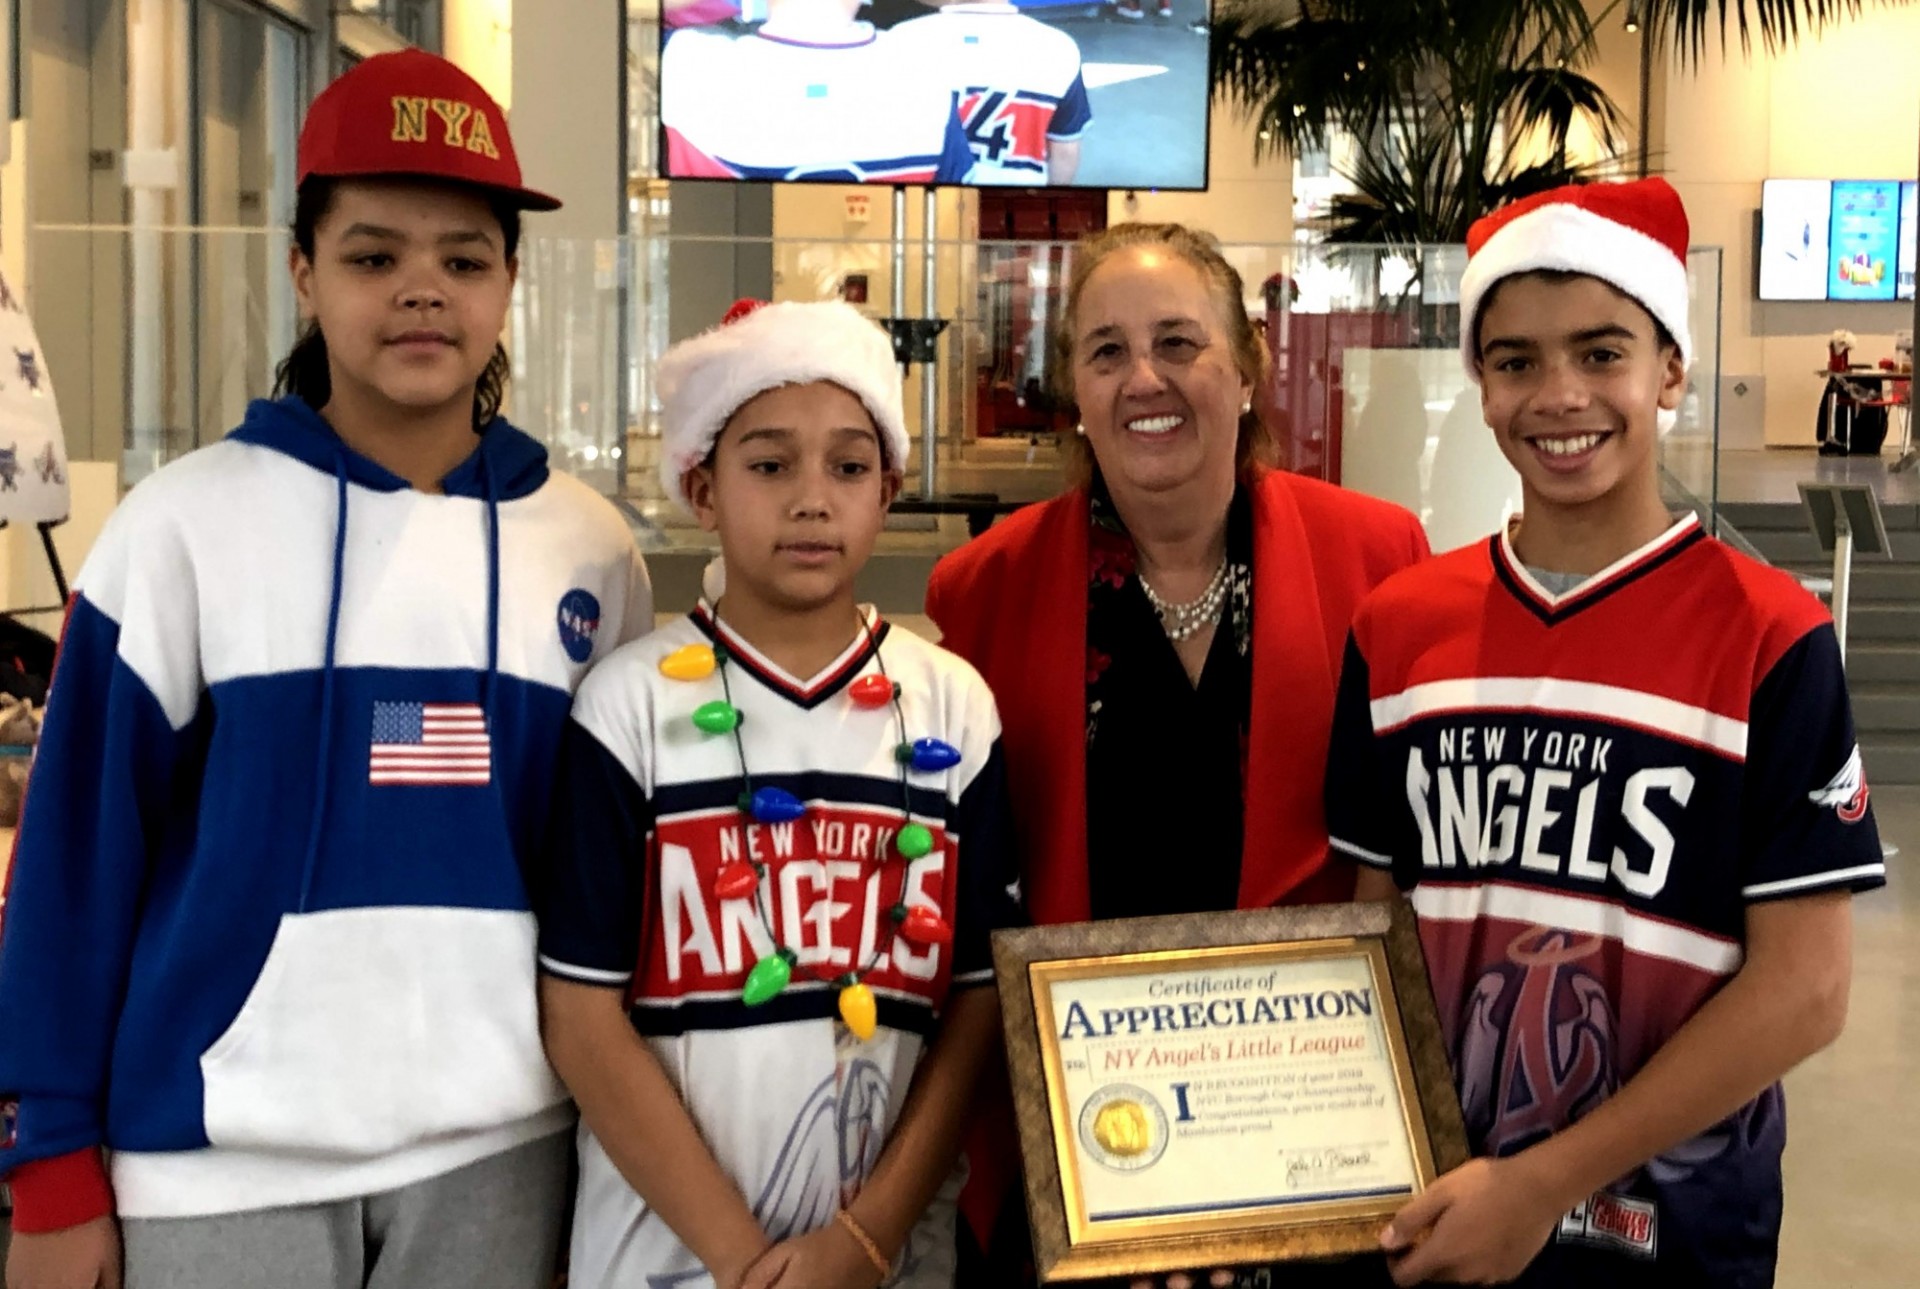 Manhattan Borough President Gale Brewer with 3 Little League players